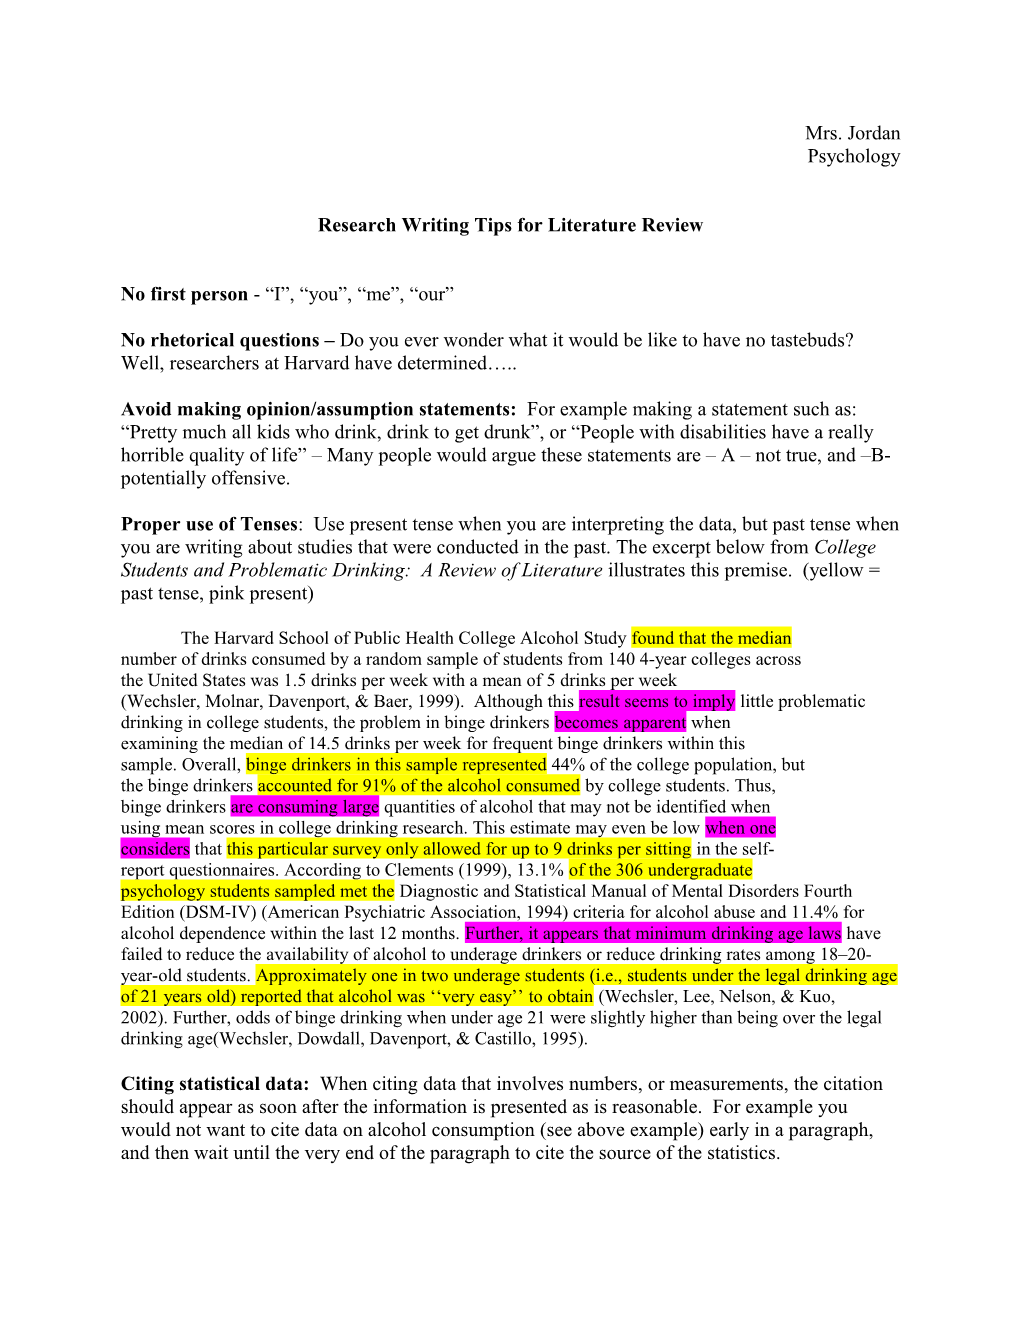 Research Writing Tips for Literature Review